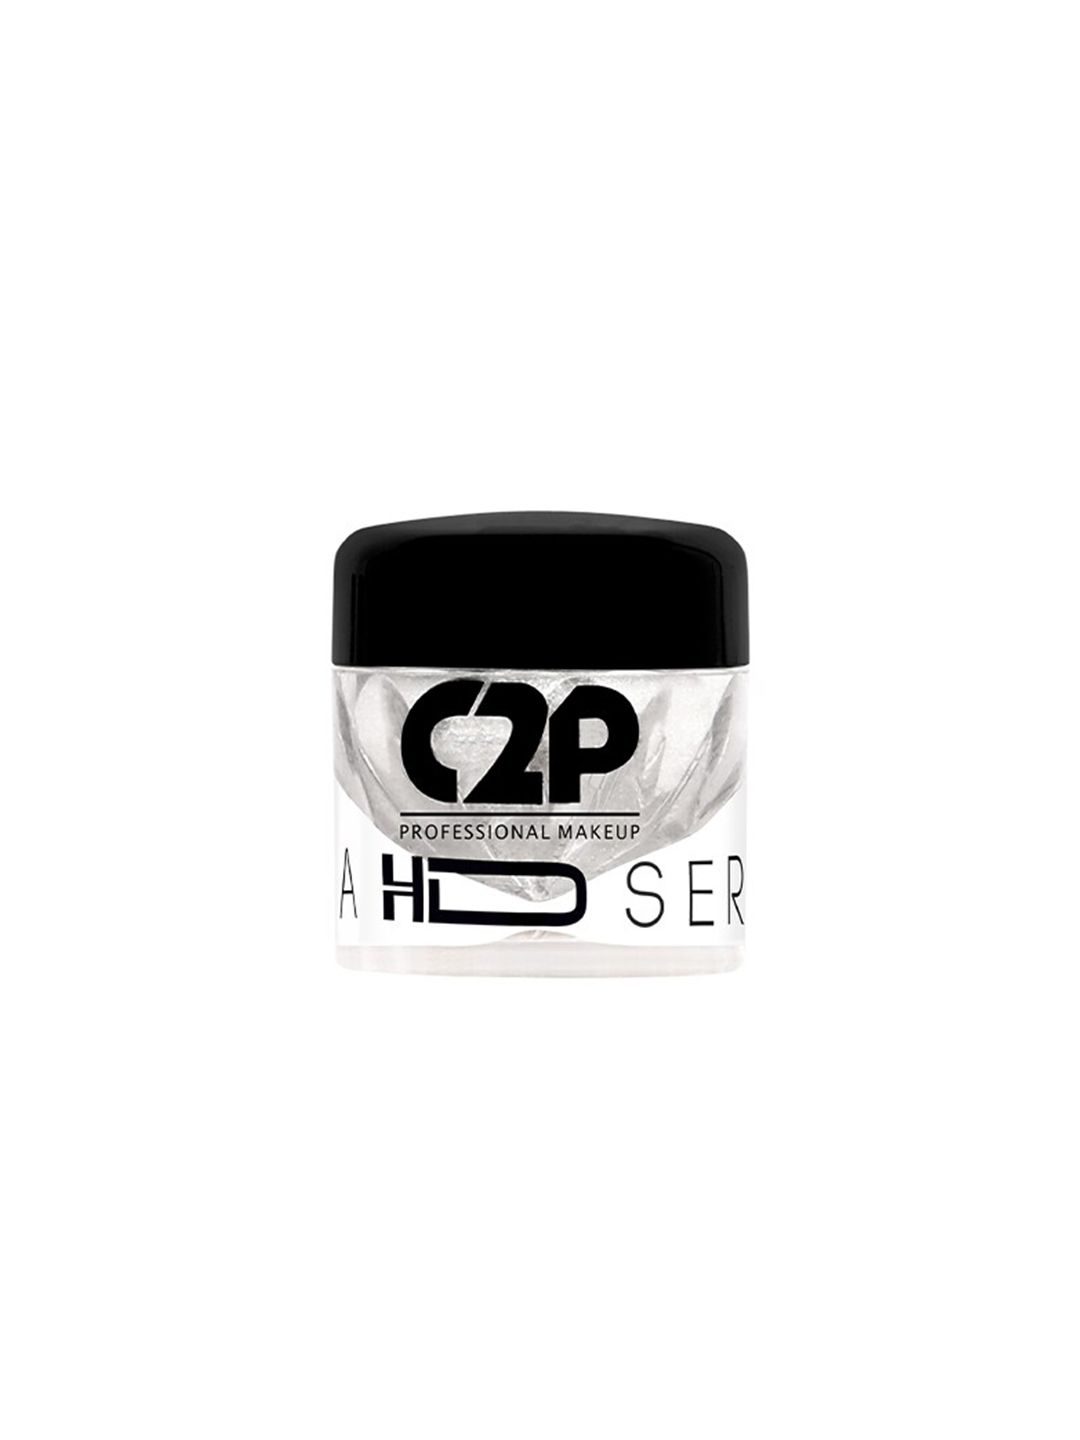 C2P PROFESSIONAL MAKEUP HD Loose Precious Pigments 2 g - Due Silver 152 Price in India